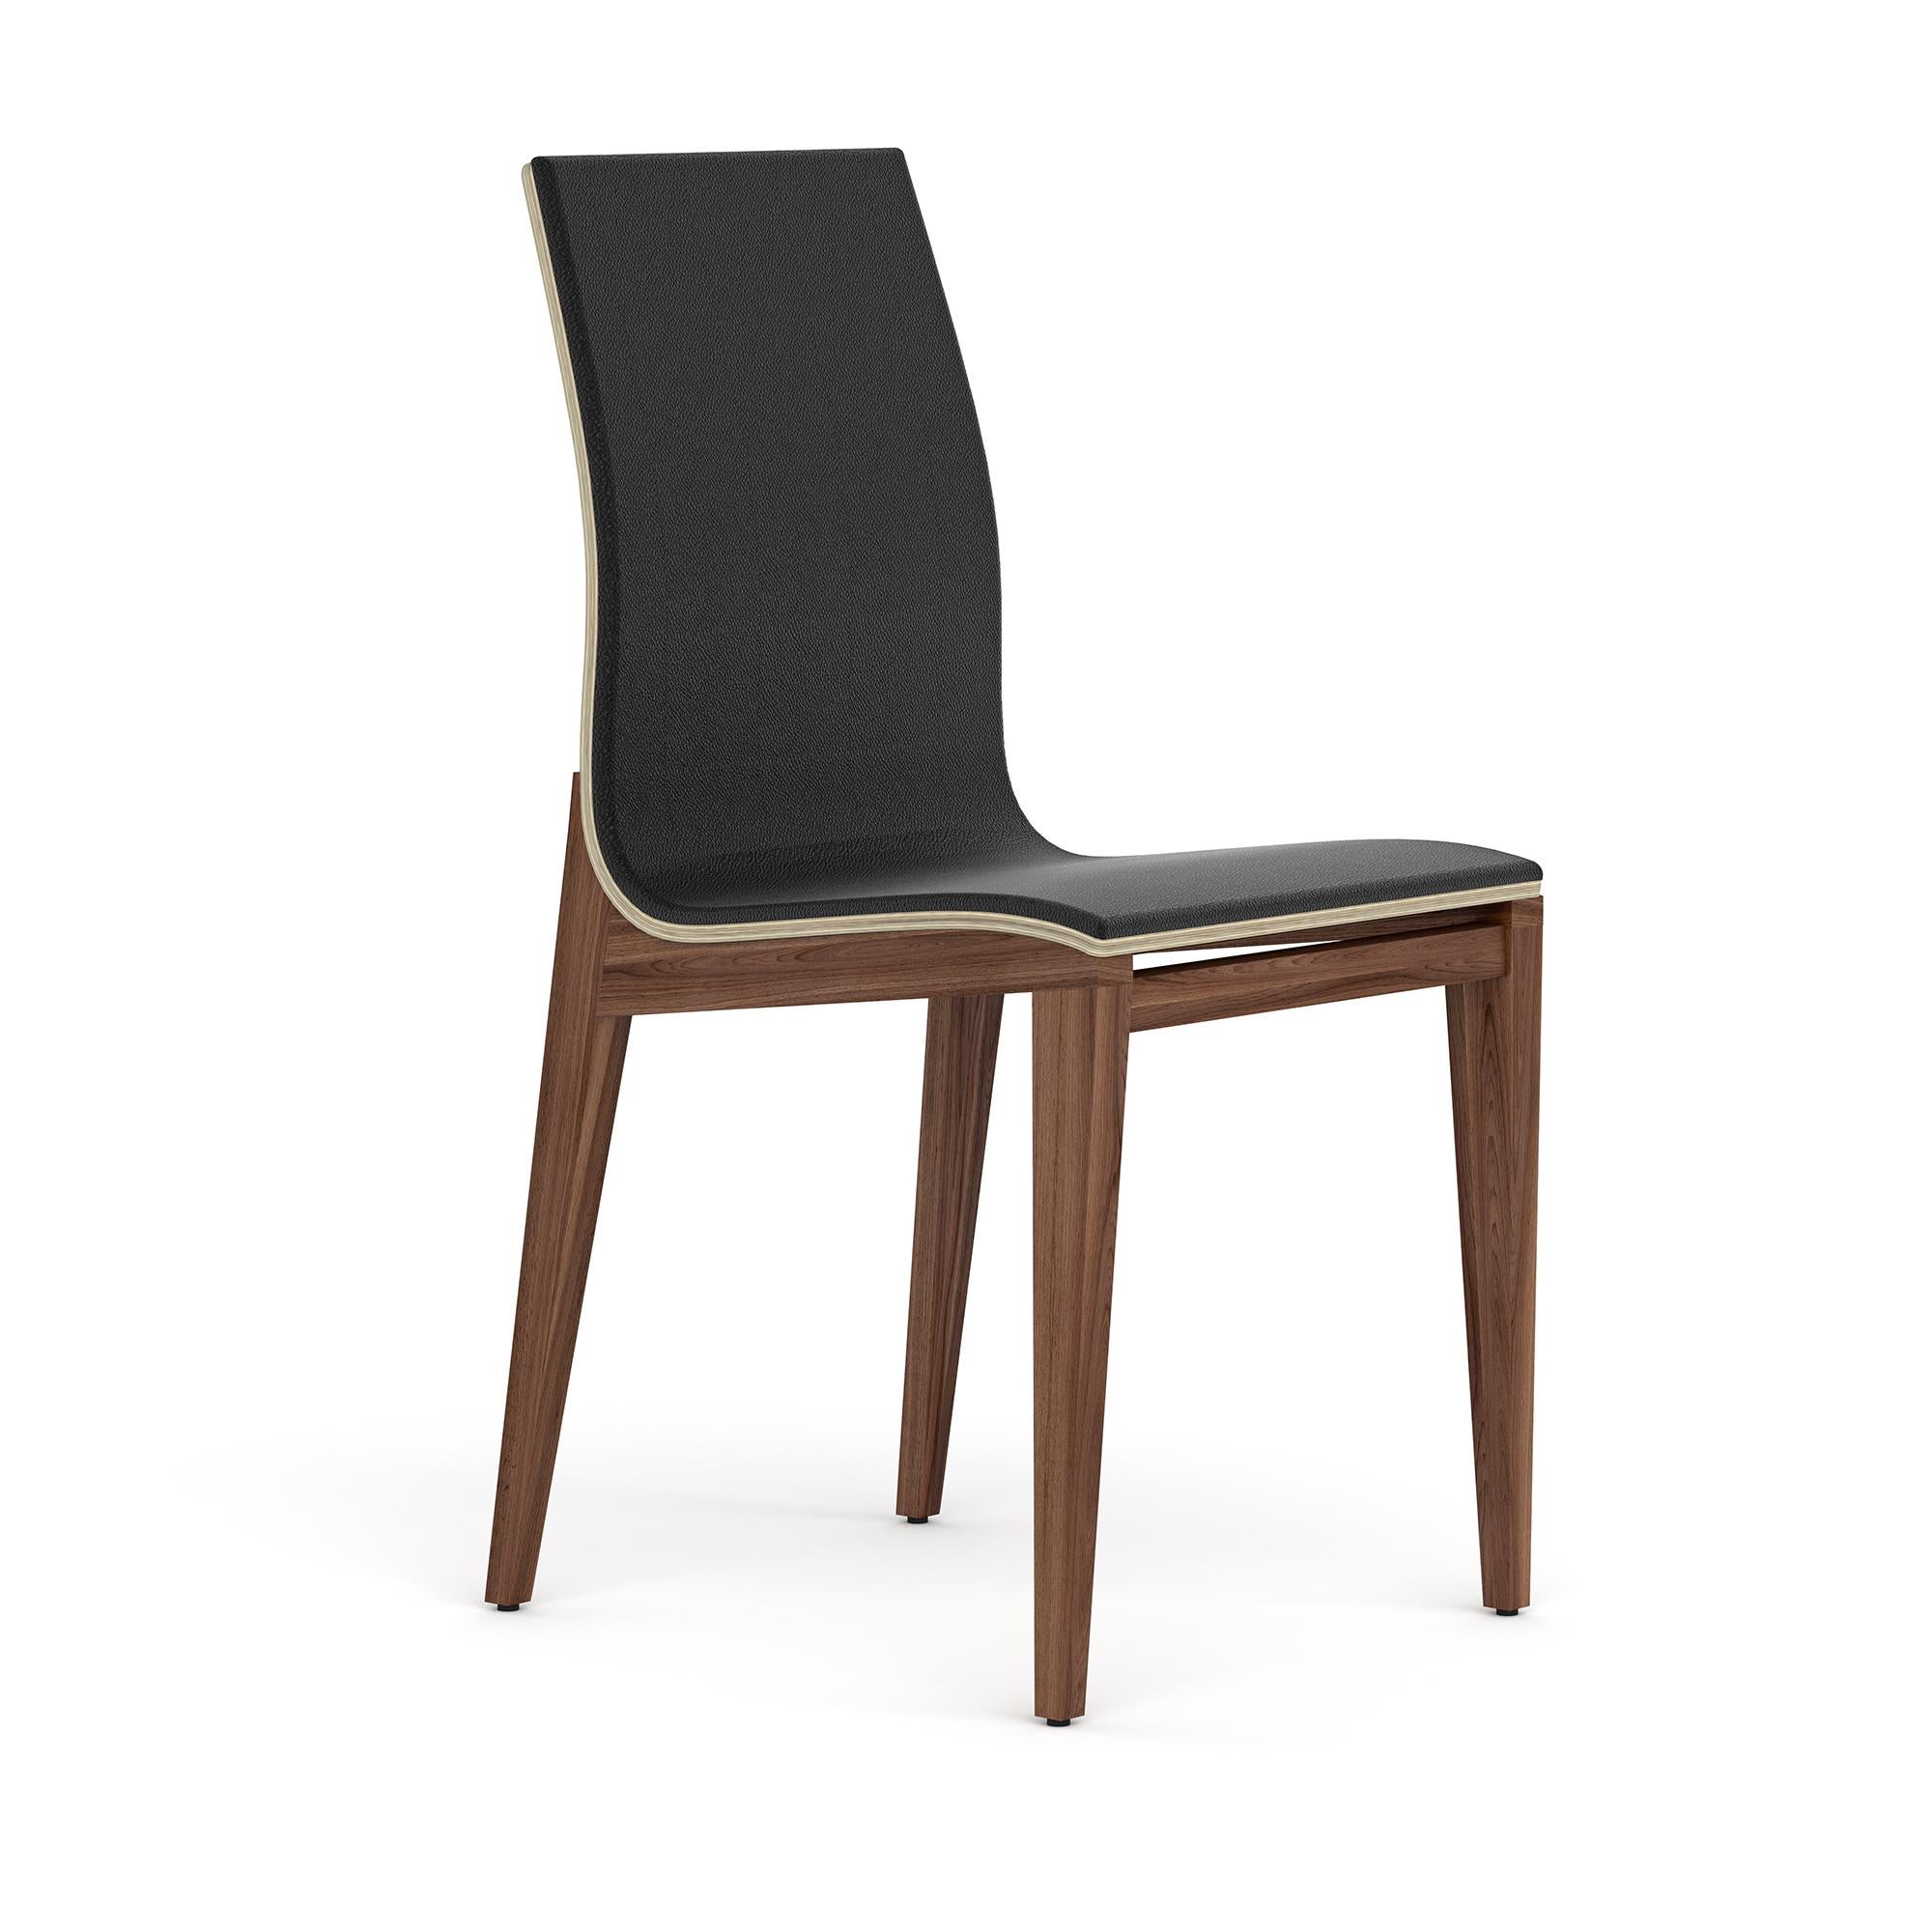 At first glance it appears to be a simple wood dining chair. And it is. A well-built, simple lined yet elegant and comfortable chair, that can complete a dining room without imposing itself. It is only when seeing its profile that one can admire its